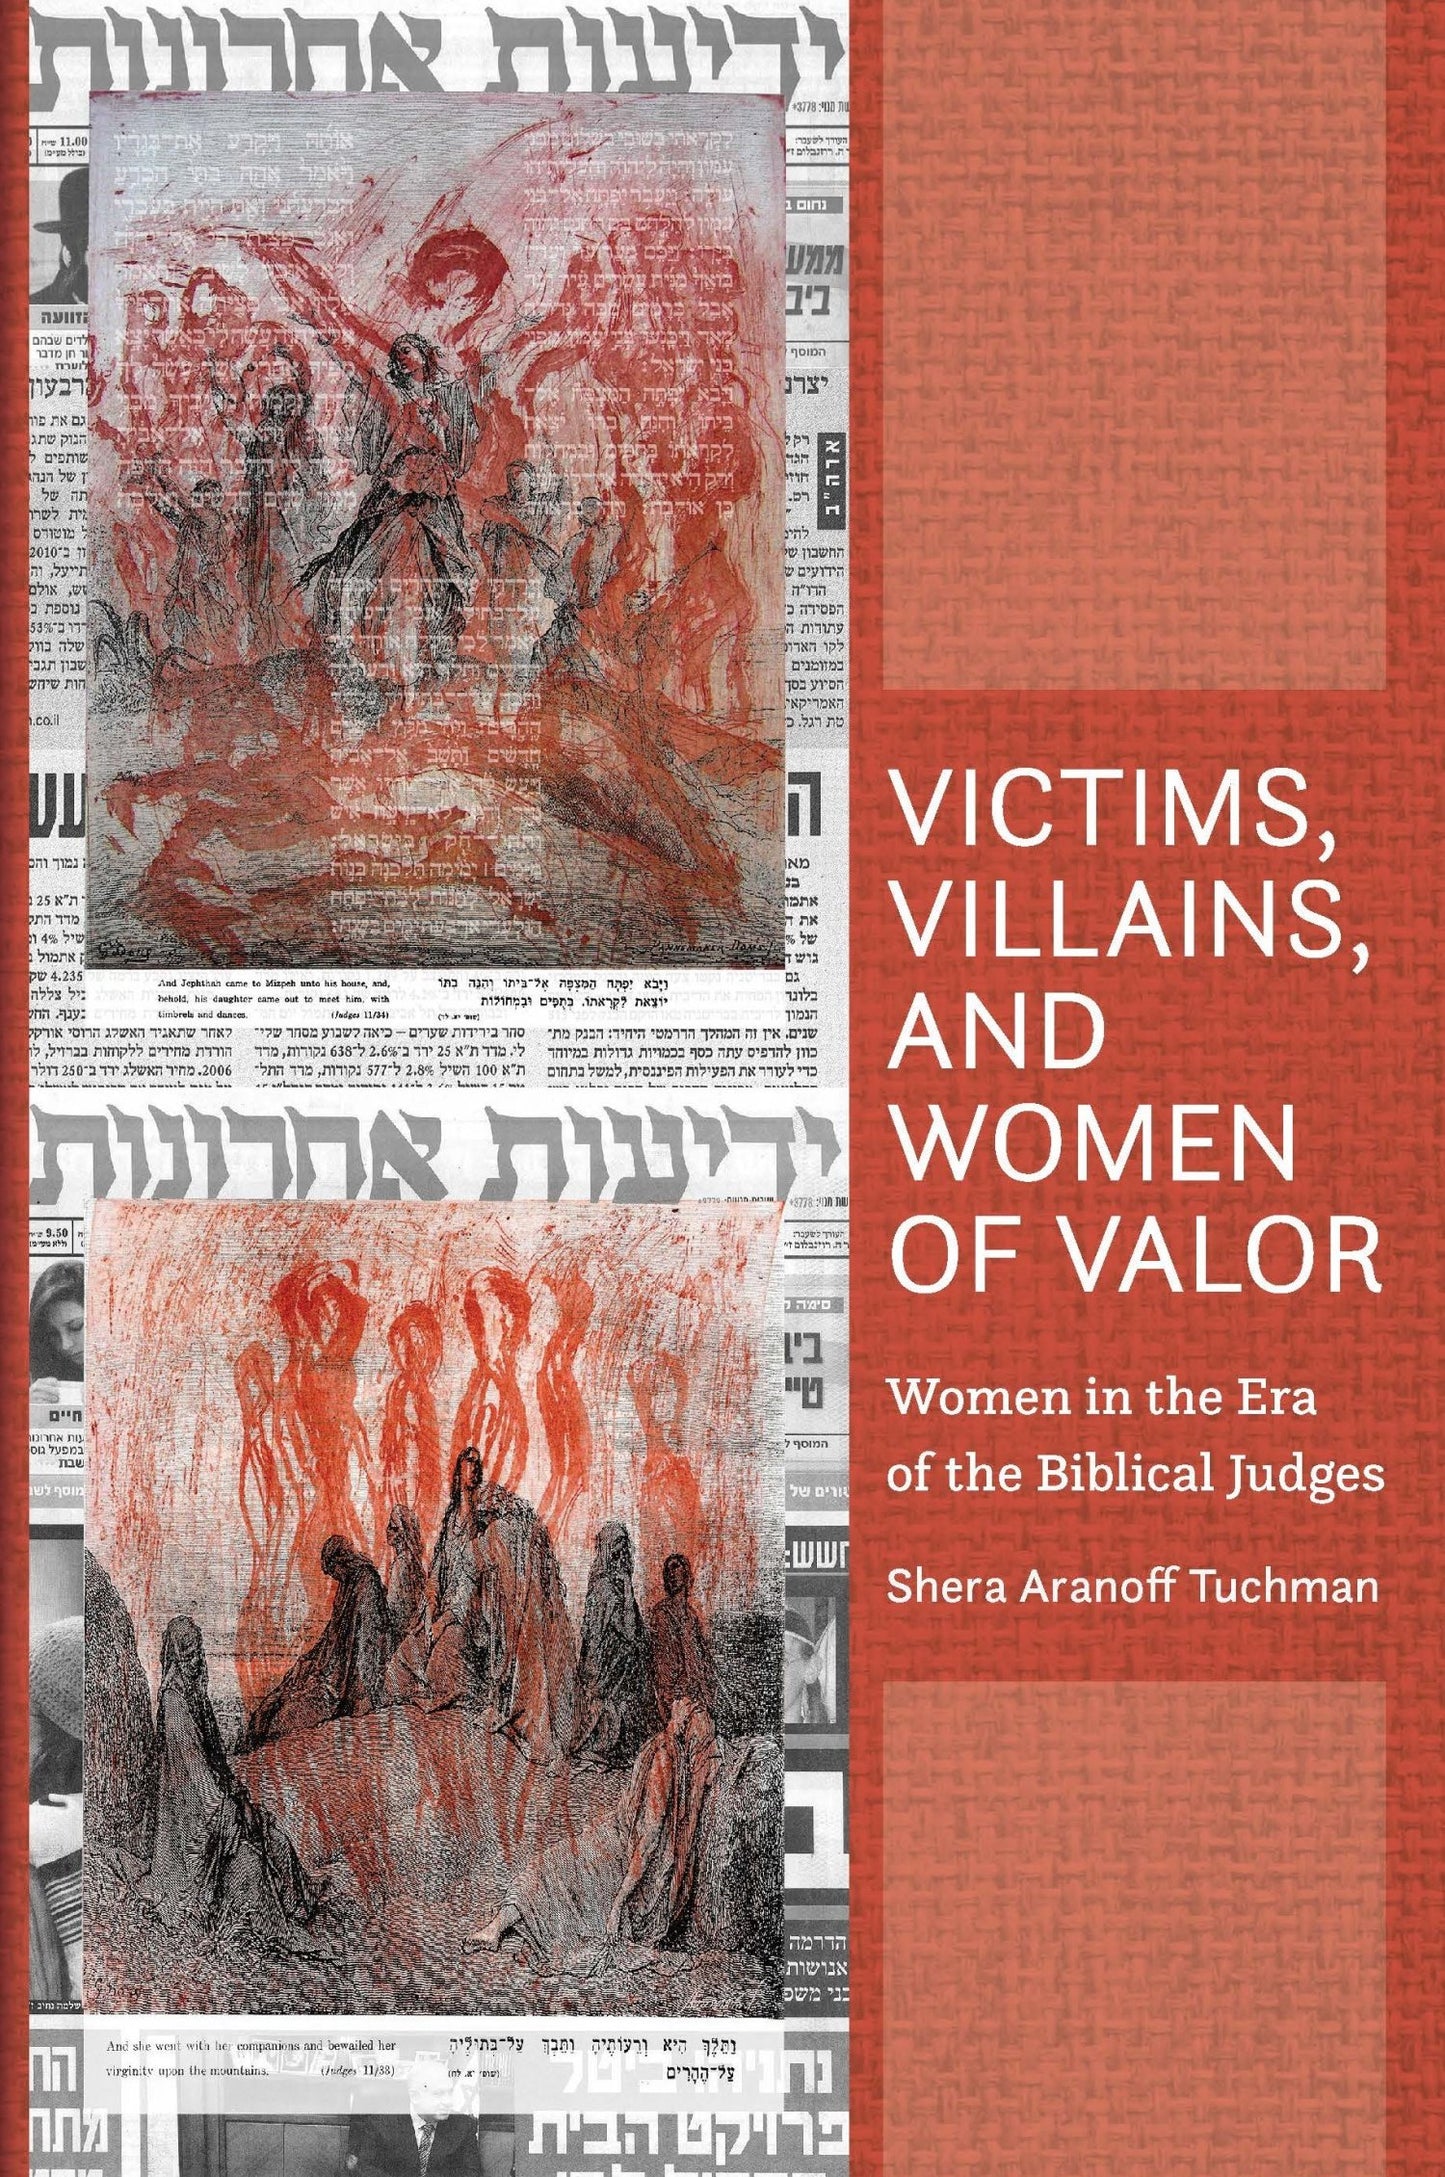 Victims, Villains and Women of Valor - Women in the Era of the Biblical Judges